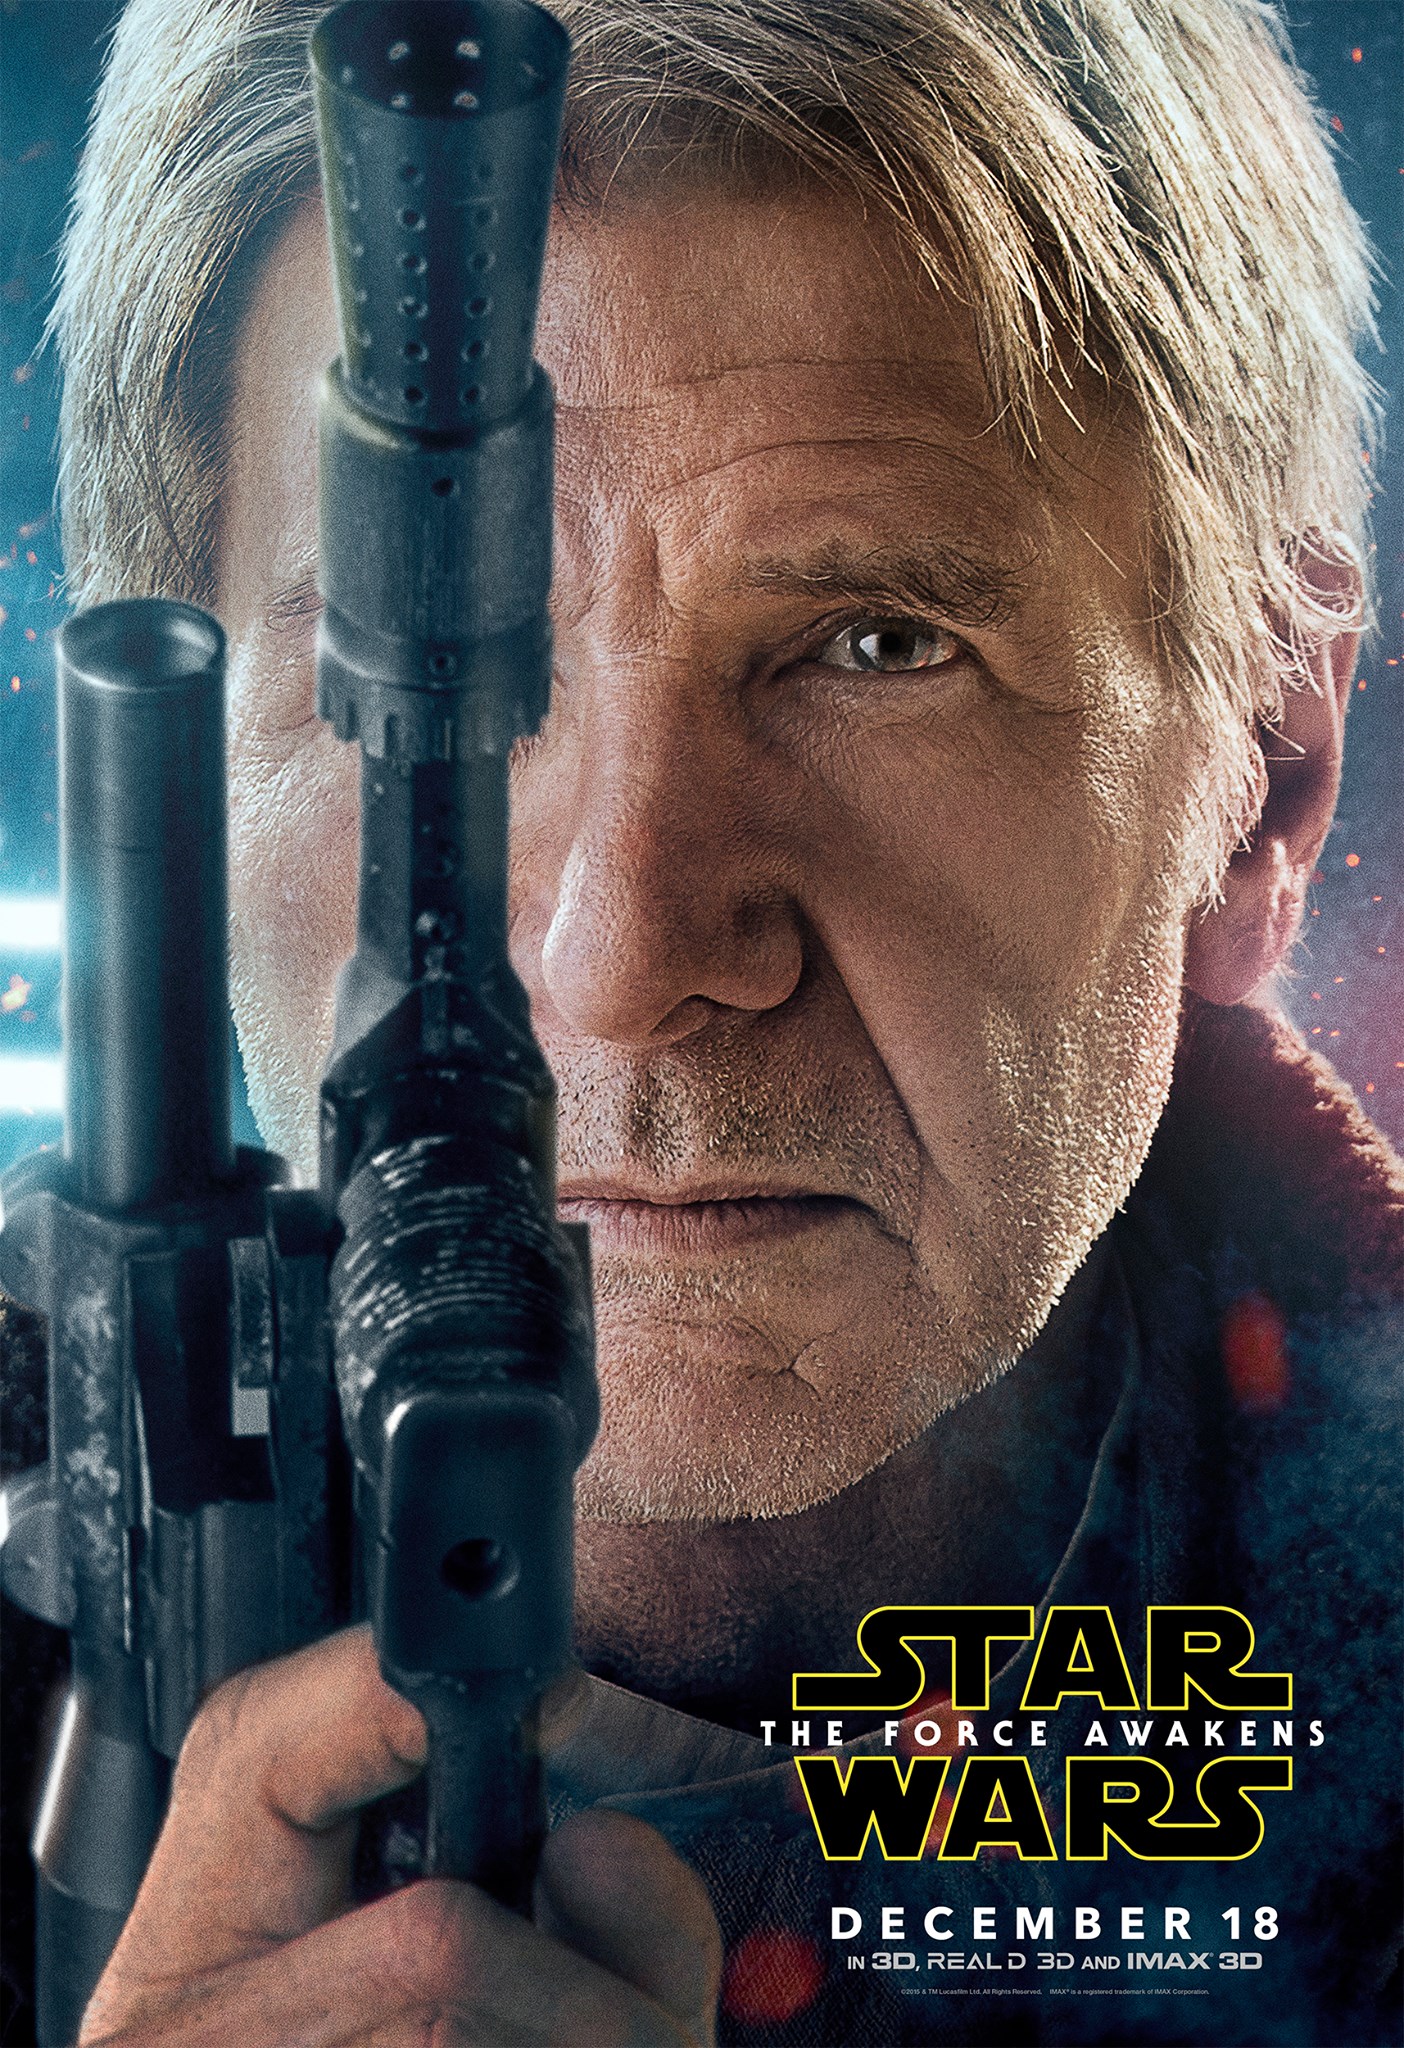 Han Solo Harrison Ford Star Wars The Force Awakens movie poster